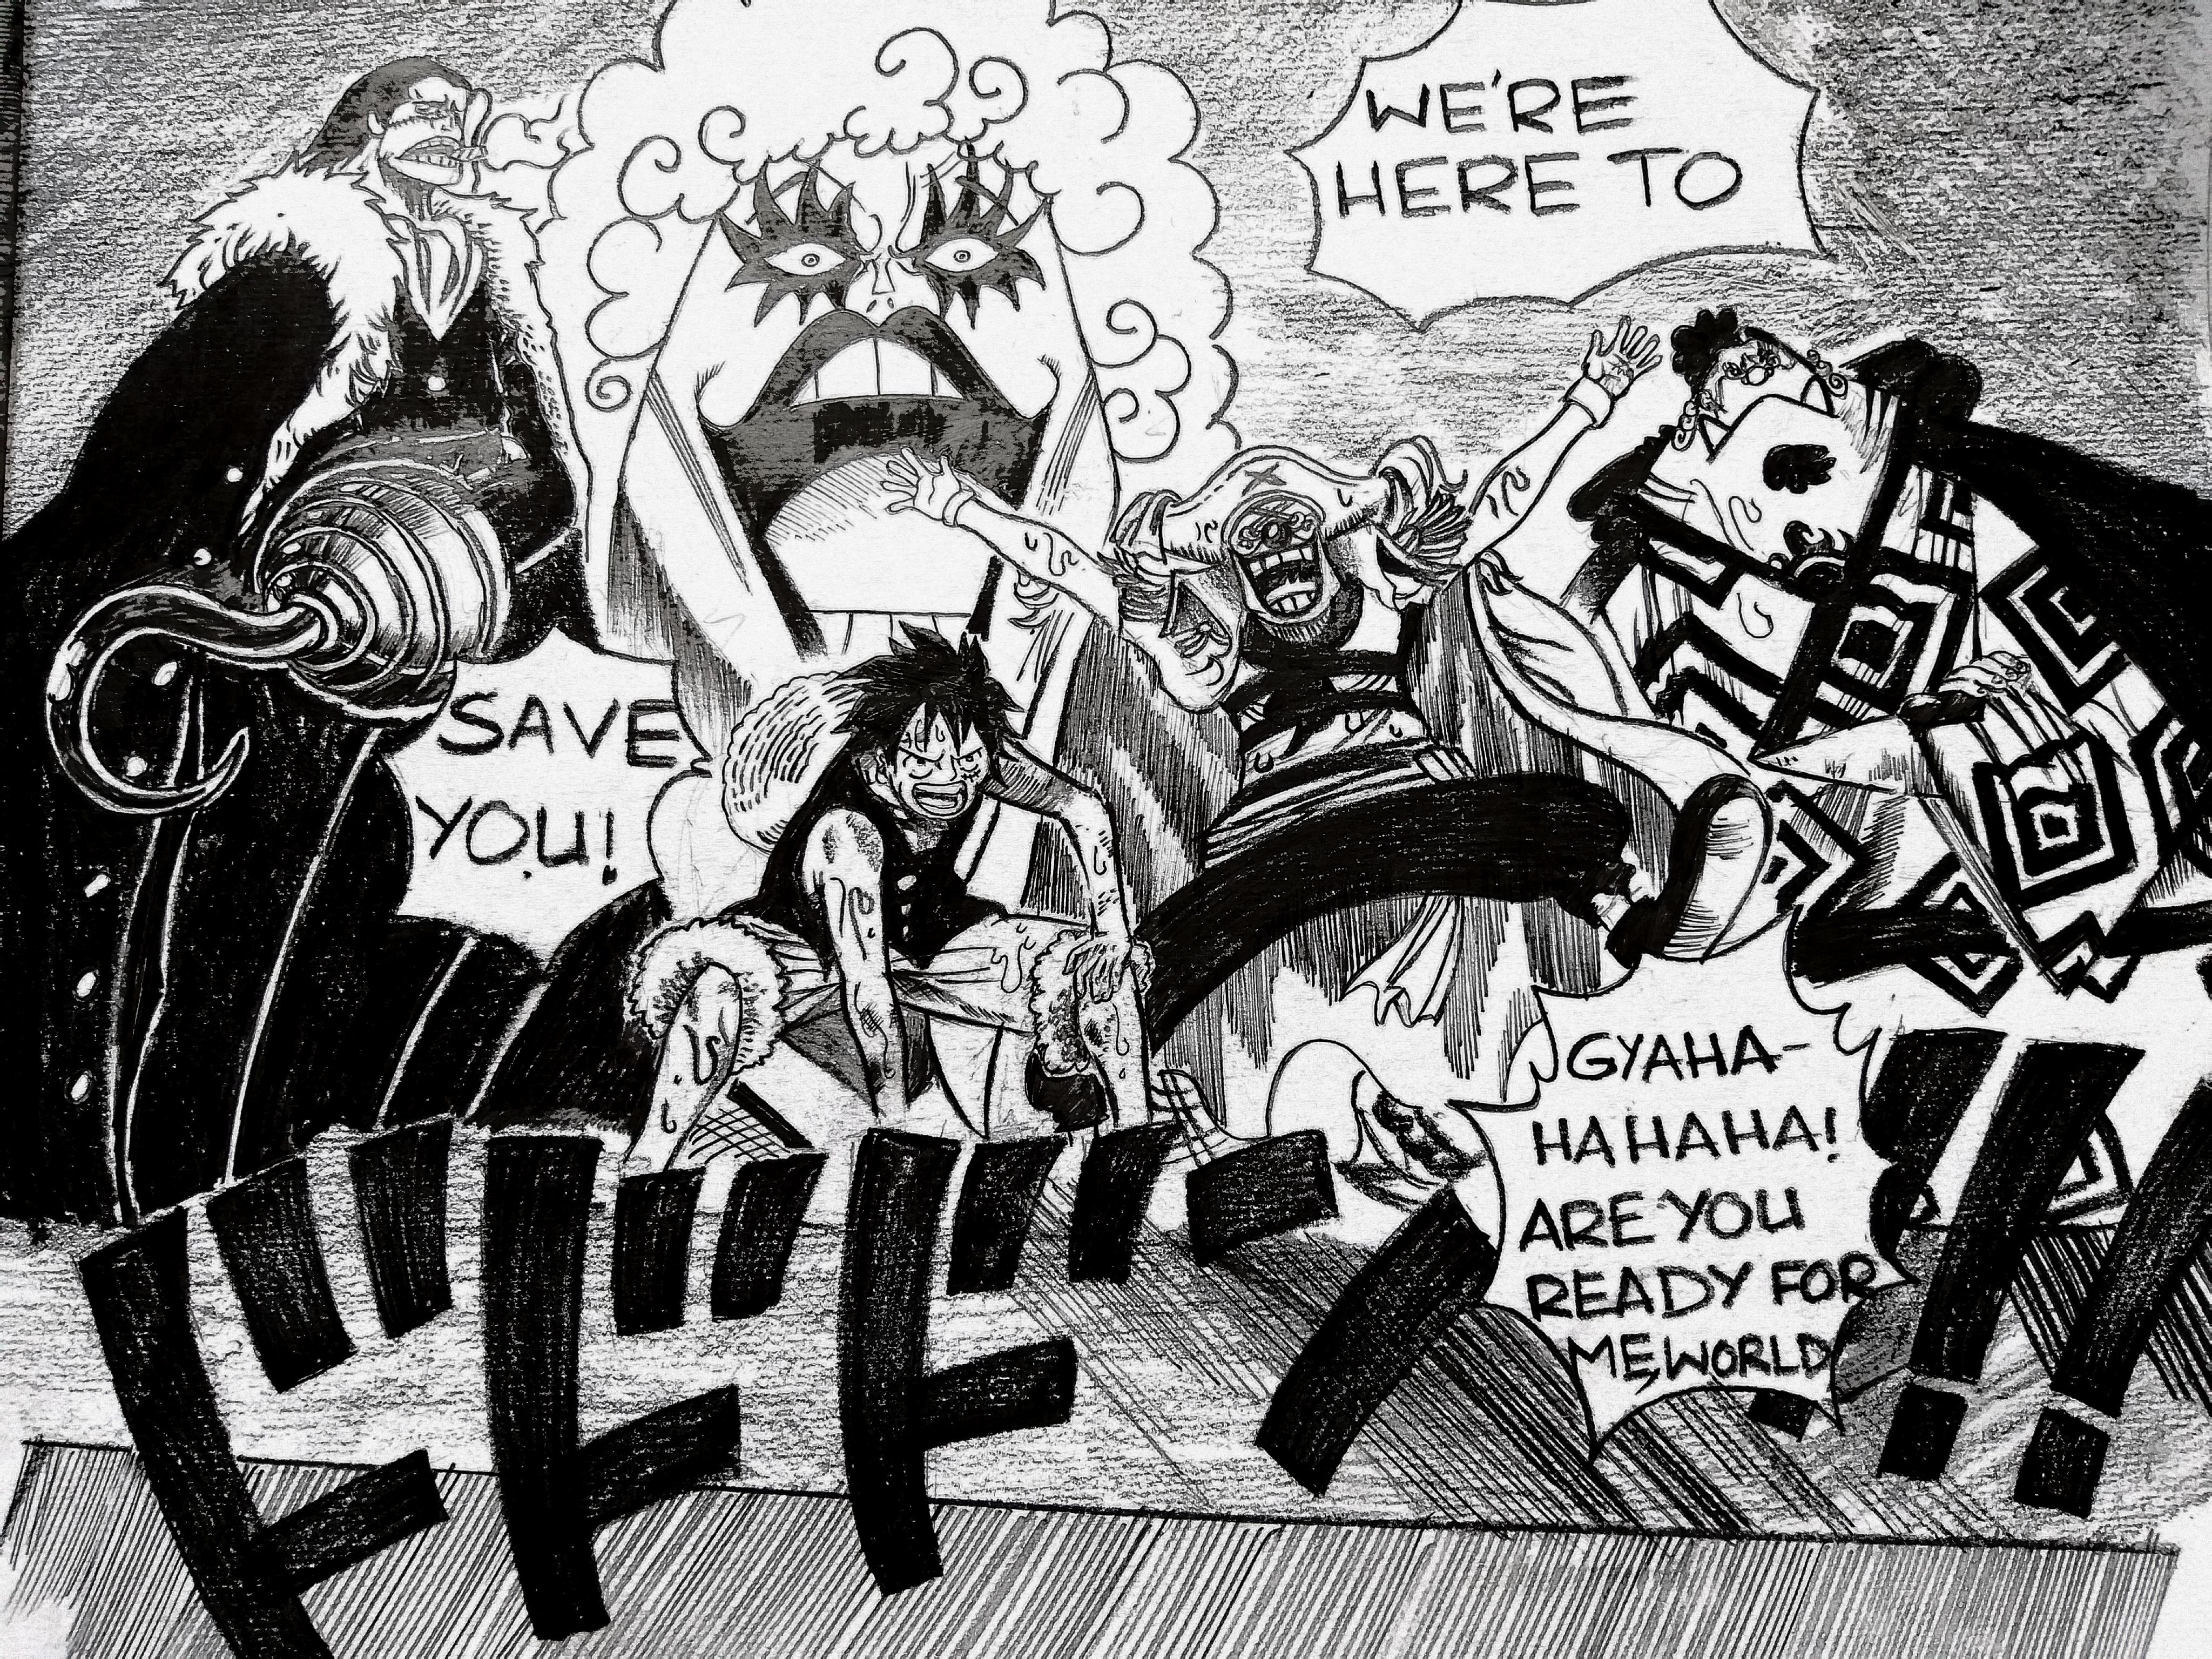 One Piece Chapter 943 Archives Hiptoro